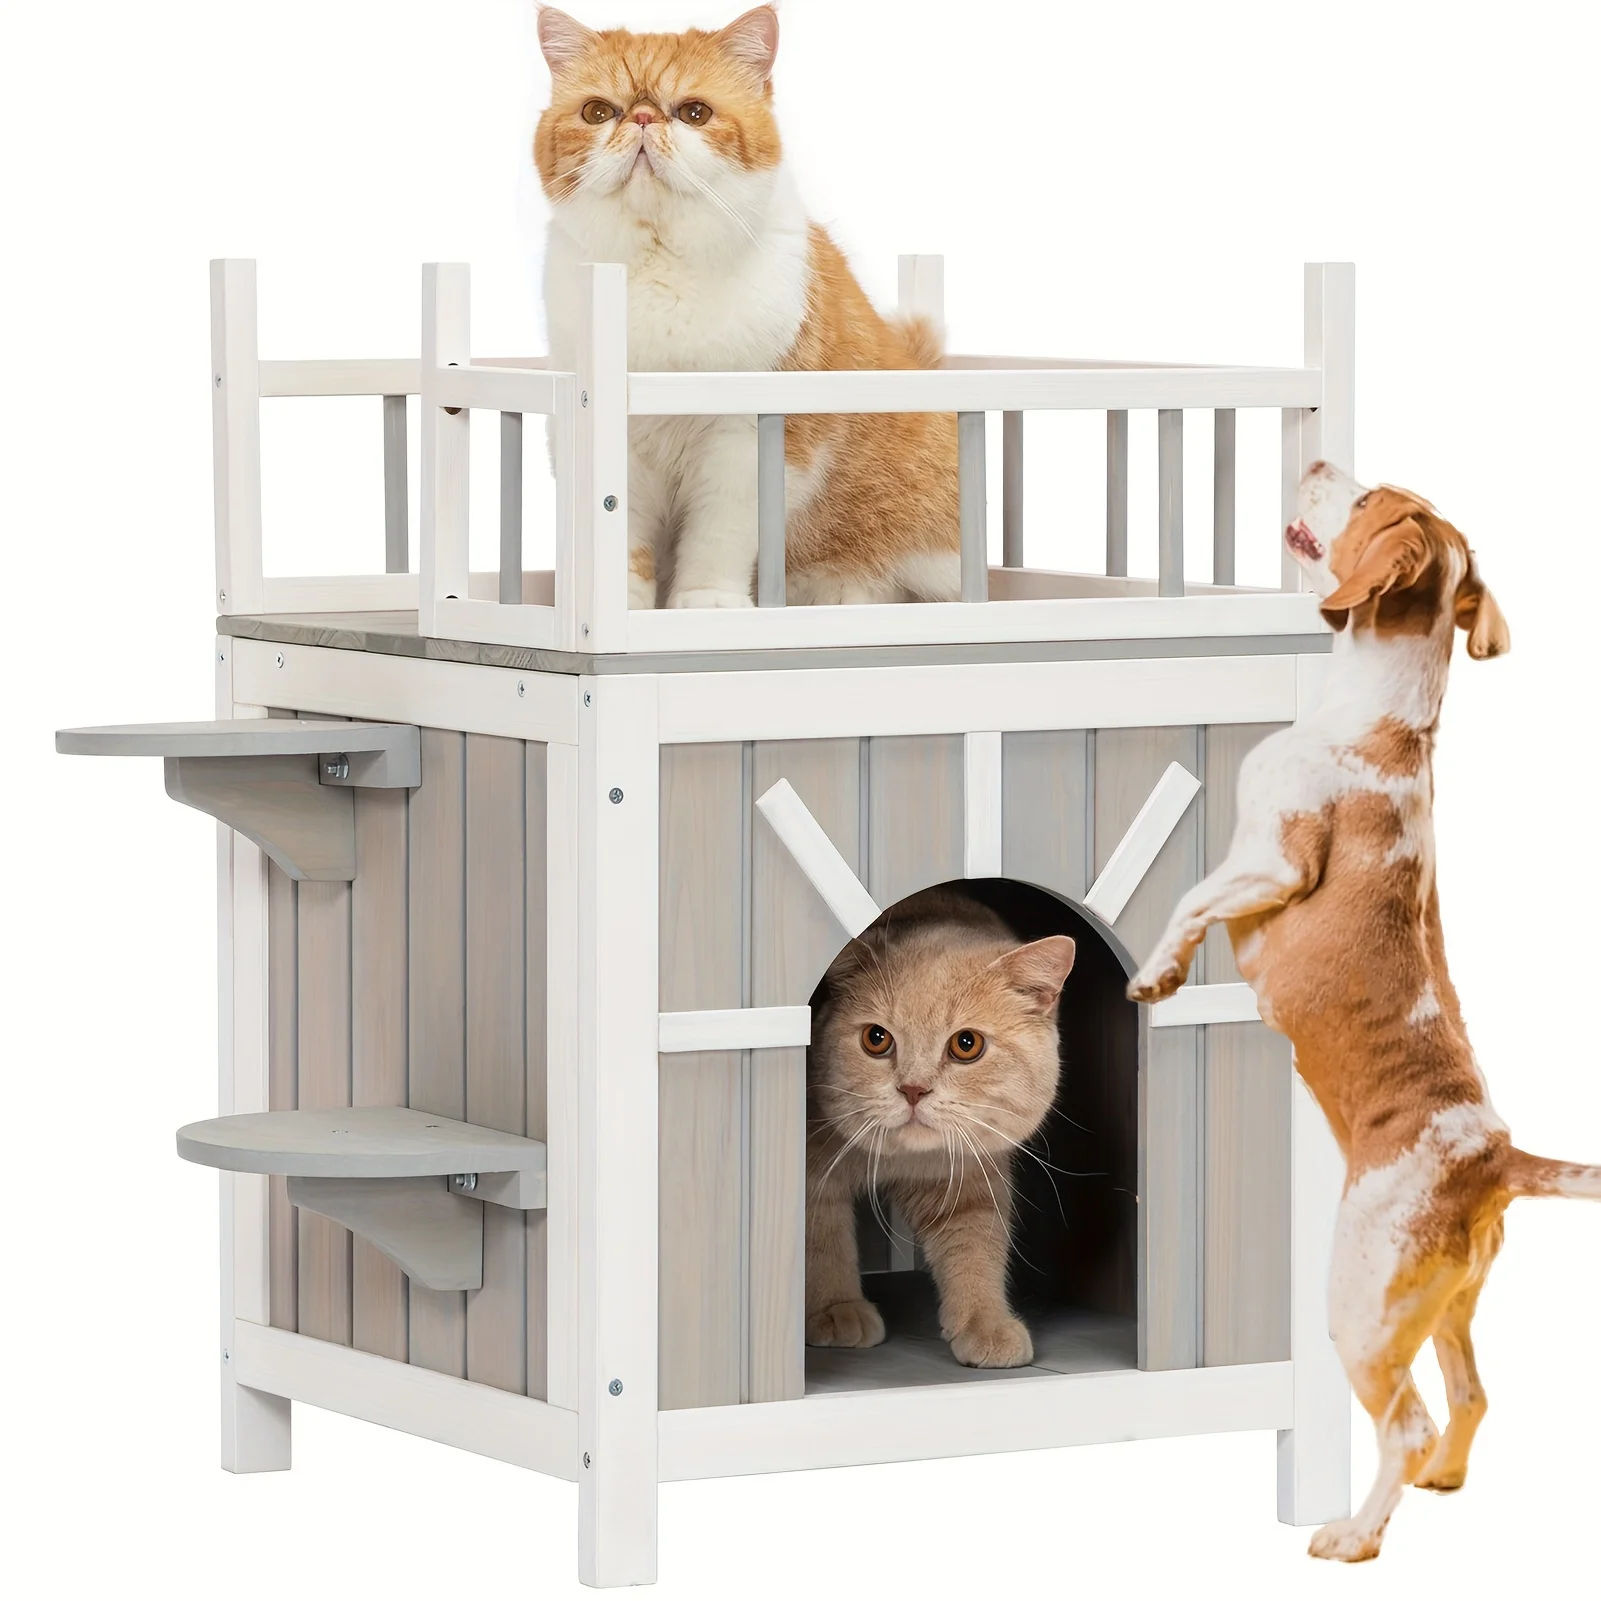 

Pets Fit Cat House, Cat Condos, Cat Feeding Station For Outdoor Indoor Cats Kittens, 2 Story Wood Feral Cat Shelter Cage Weather